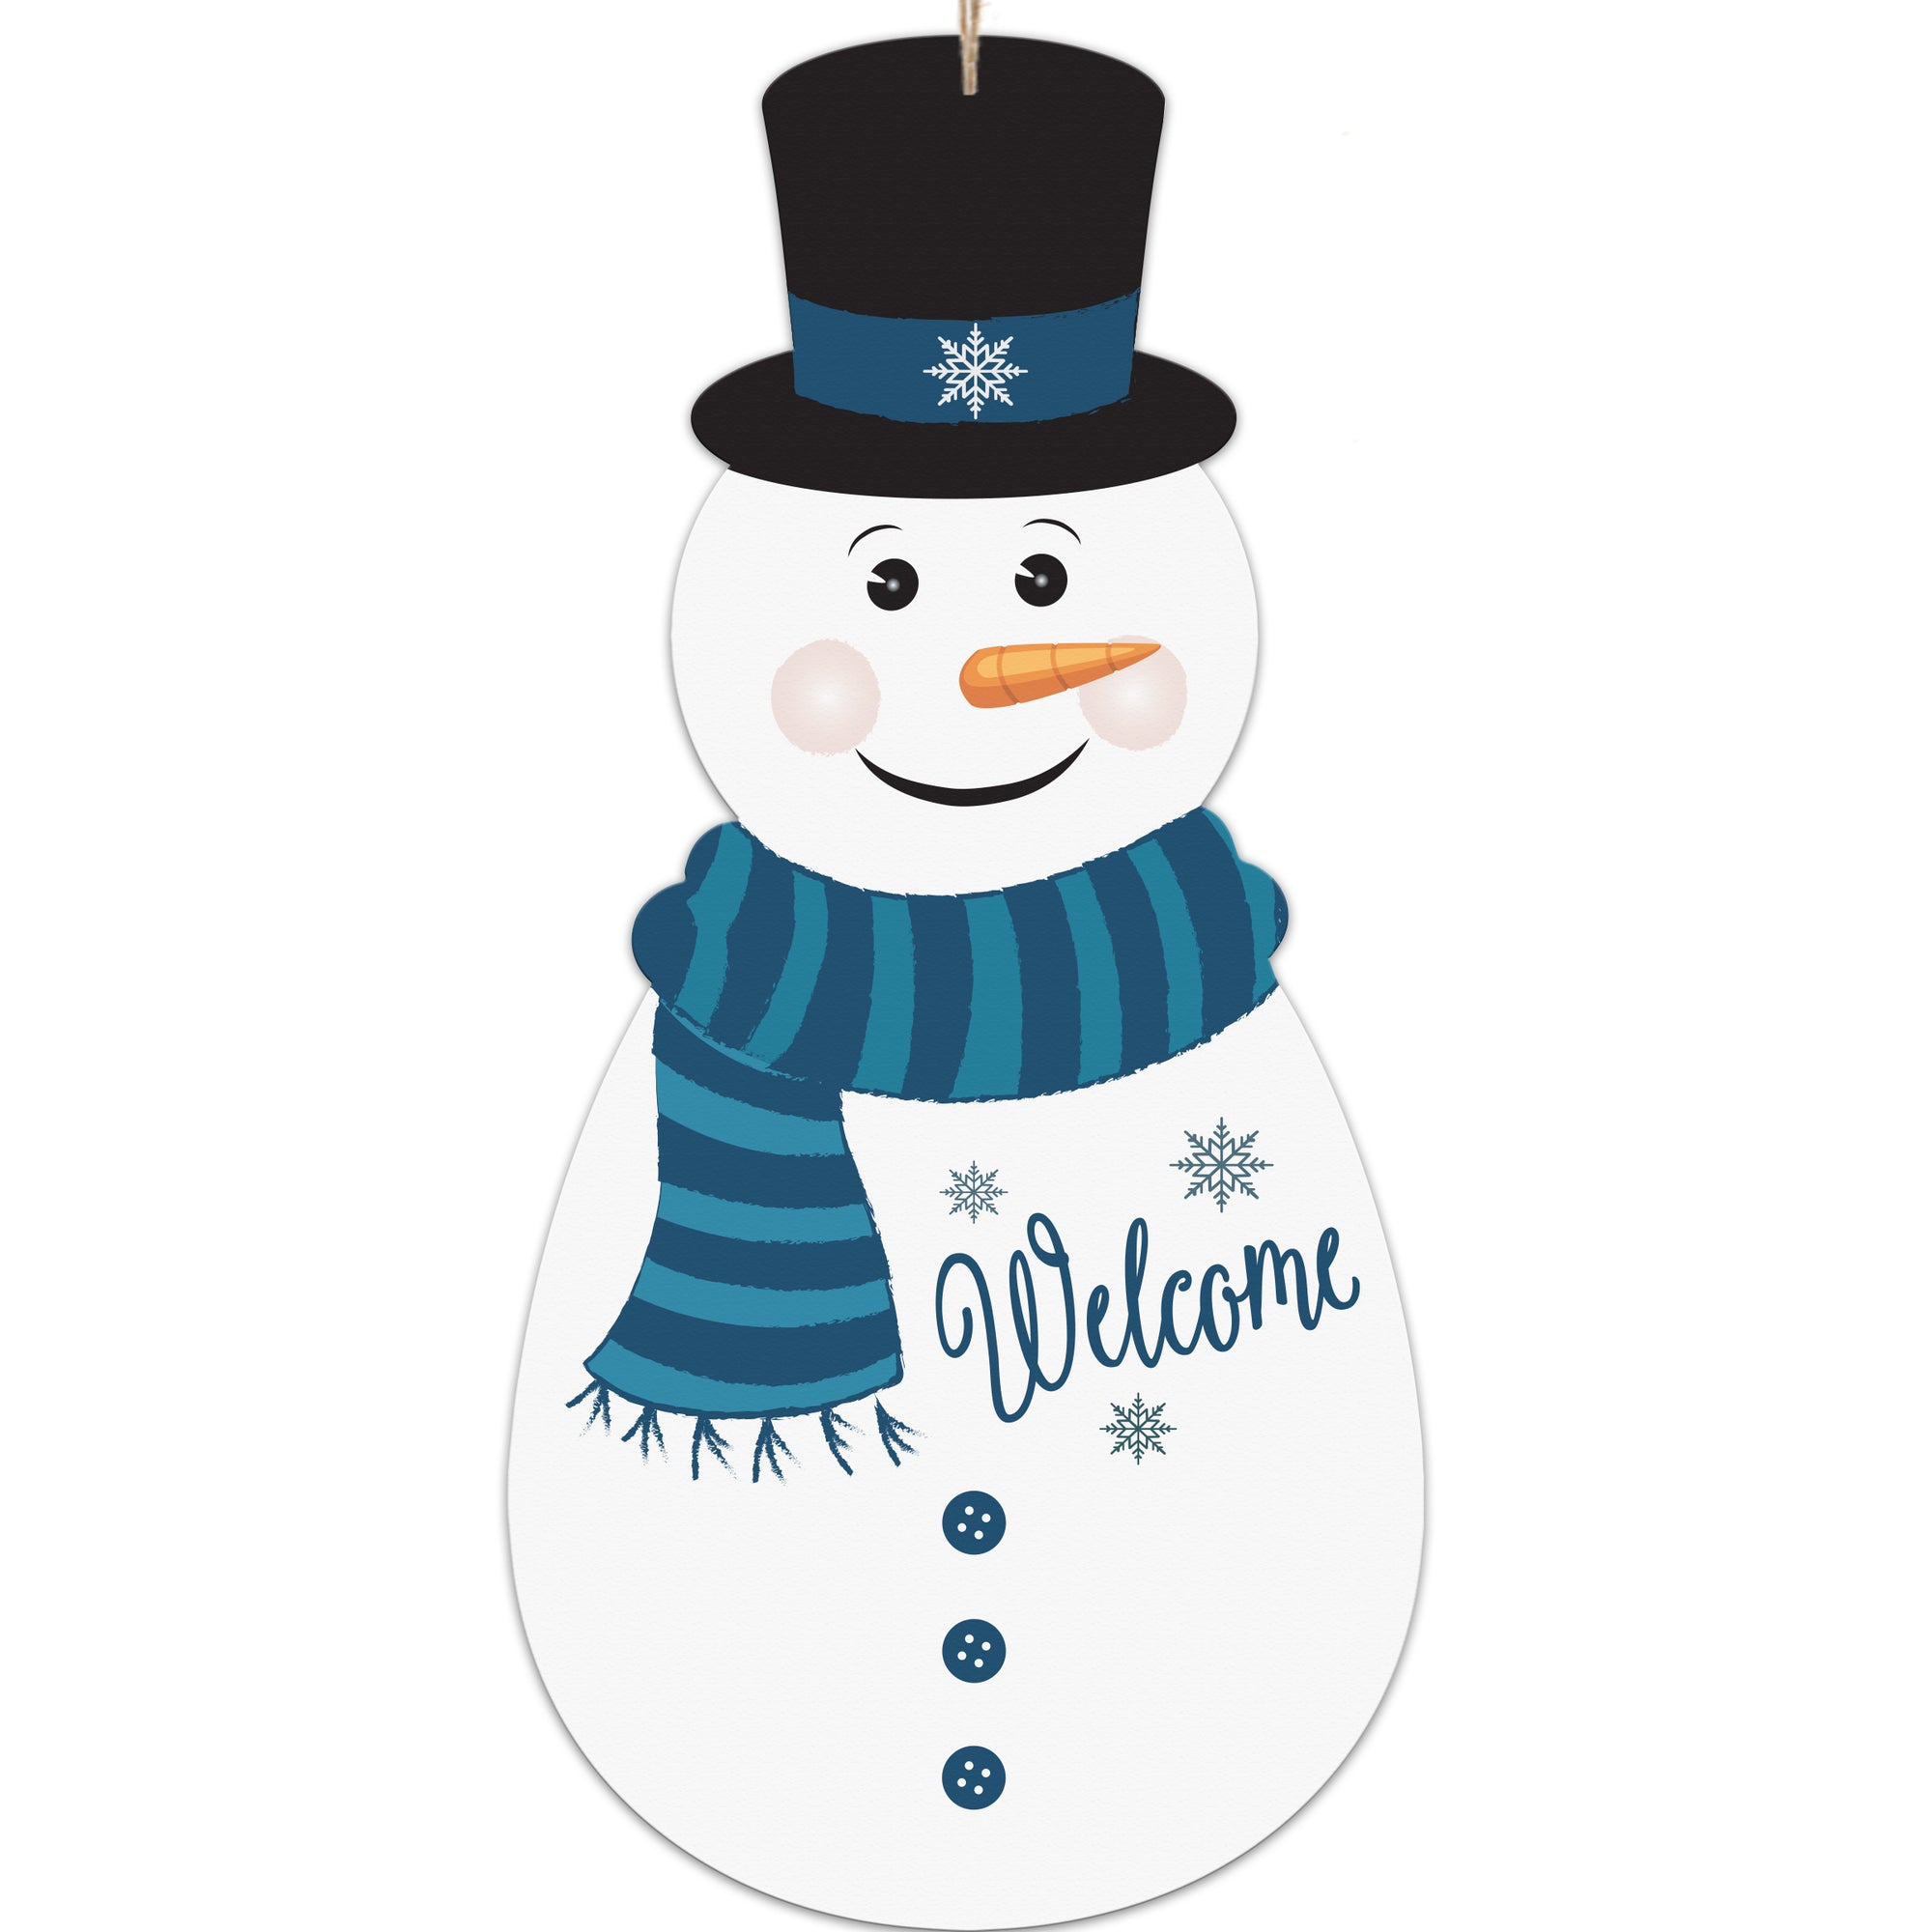 Lifesong Milestones Personalized Christmas Tree Decoration Snowman Ornament - Holiday Decor For Home Gift Ideas 8x16